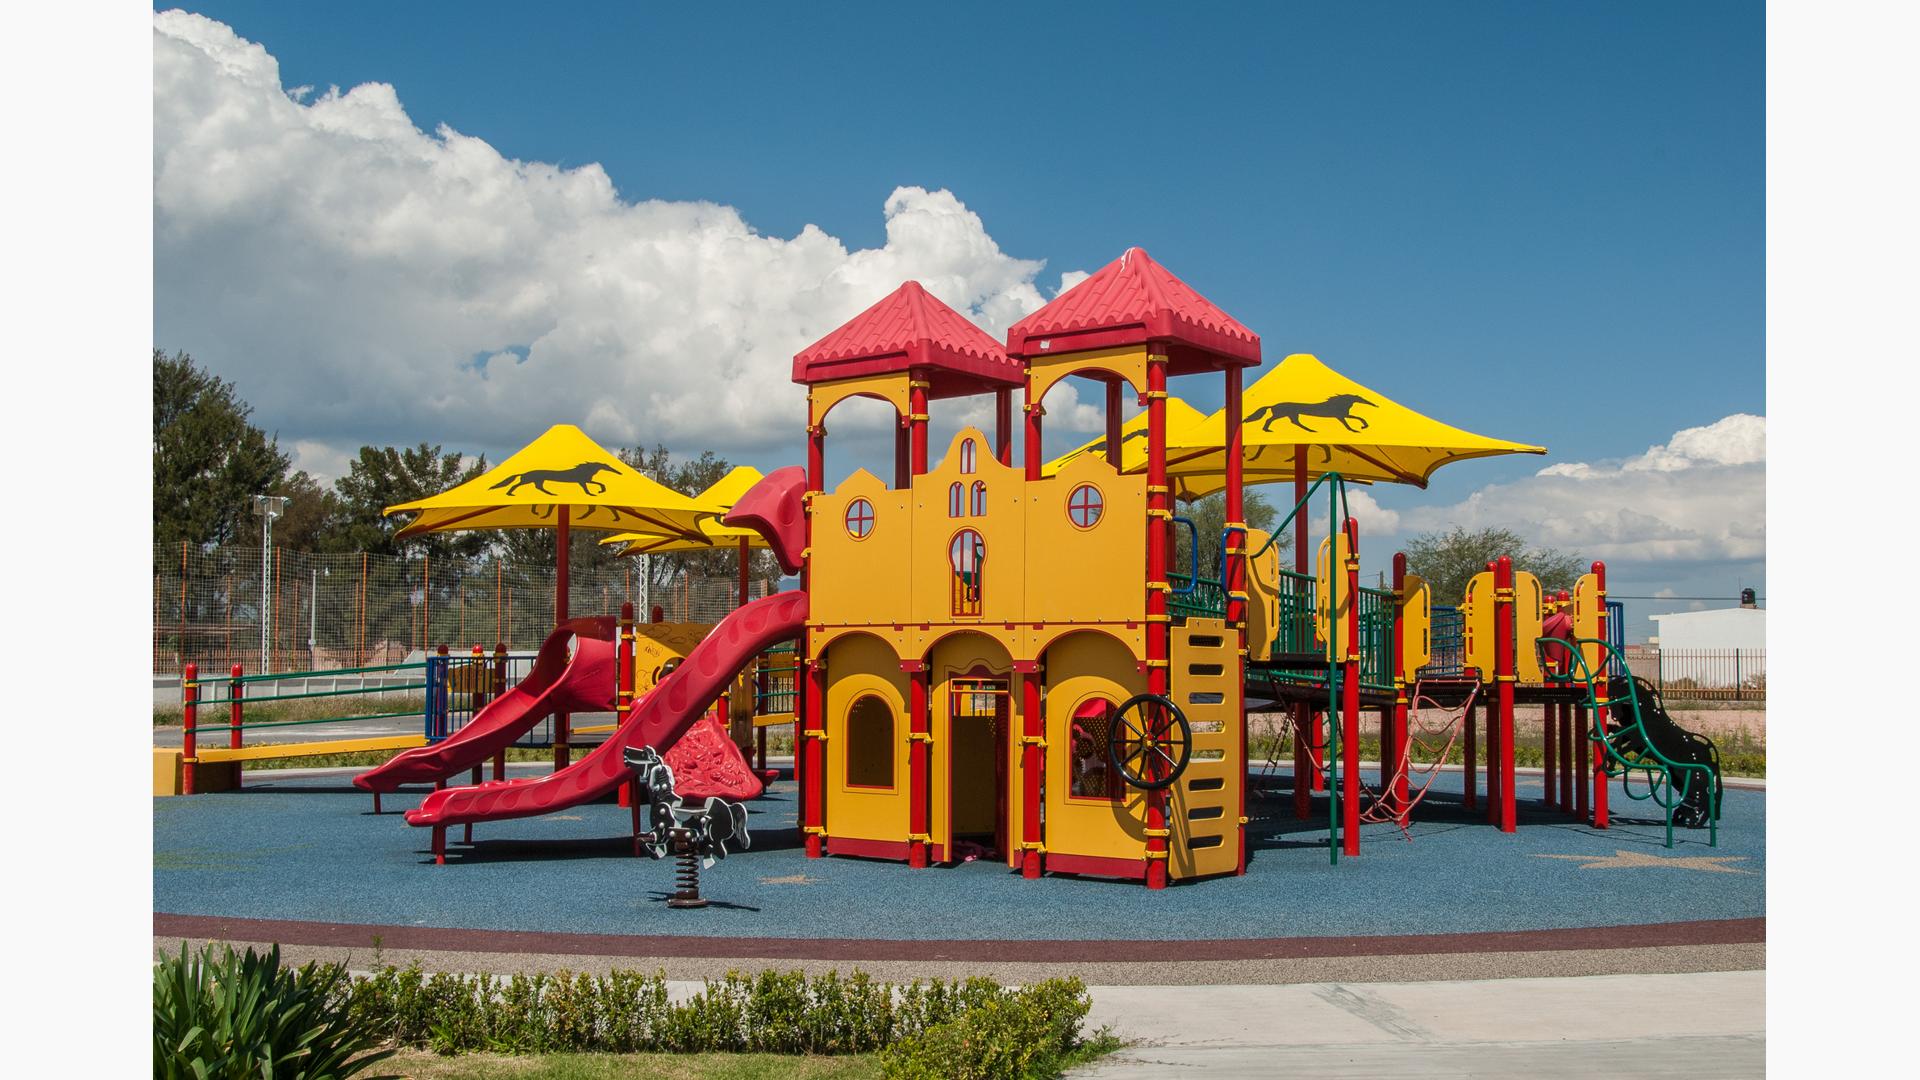 Parque Jerez, Jerez Mexico. This project is the first inclusive playground in Mexico, and was coordinated through Shane’s Inspiration. It features a custom PlayBooster® play structure.